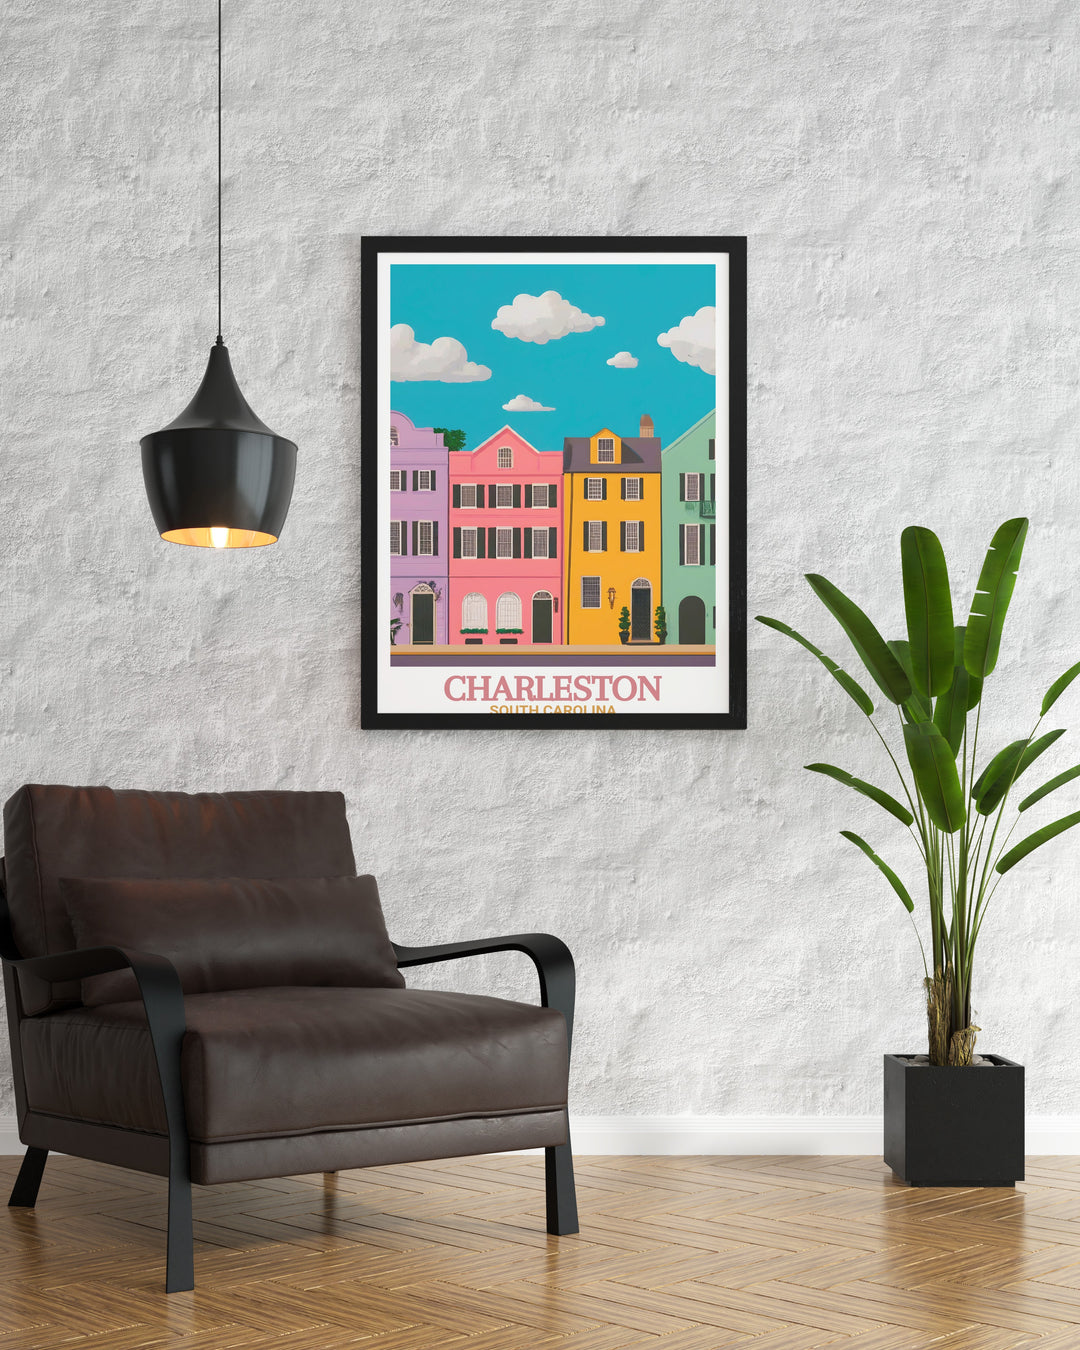 Rainbow Row travel print highlighting the historic beauty and colorful houses of Charleston perfect for wall art and home decor that evokes fond memories and inspires future travels